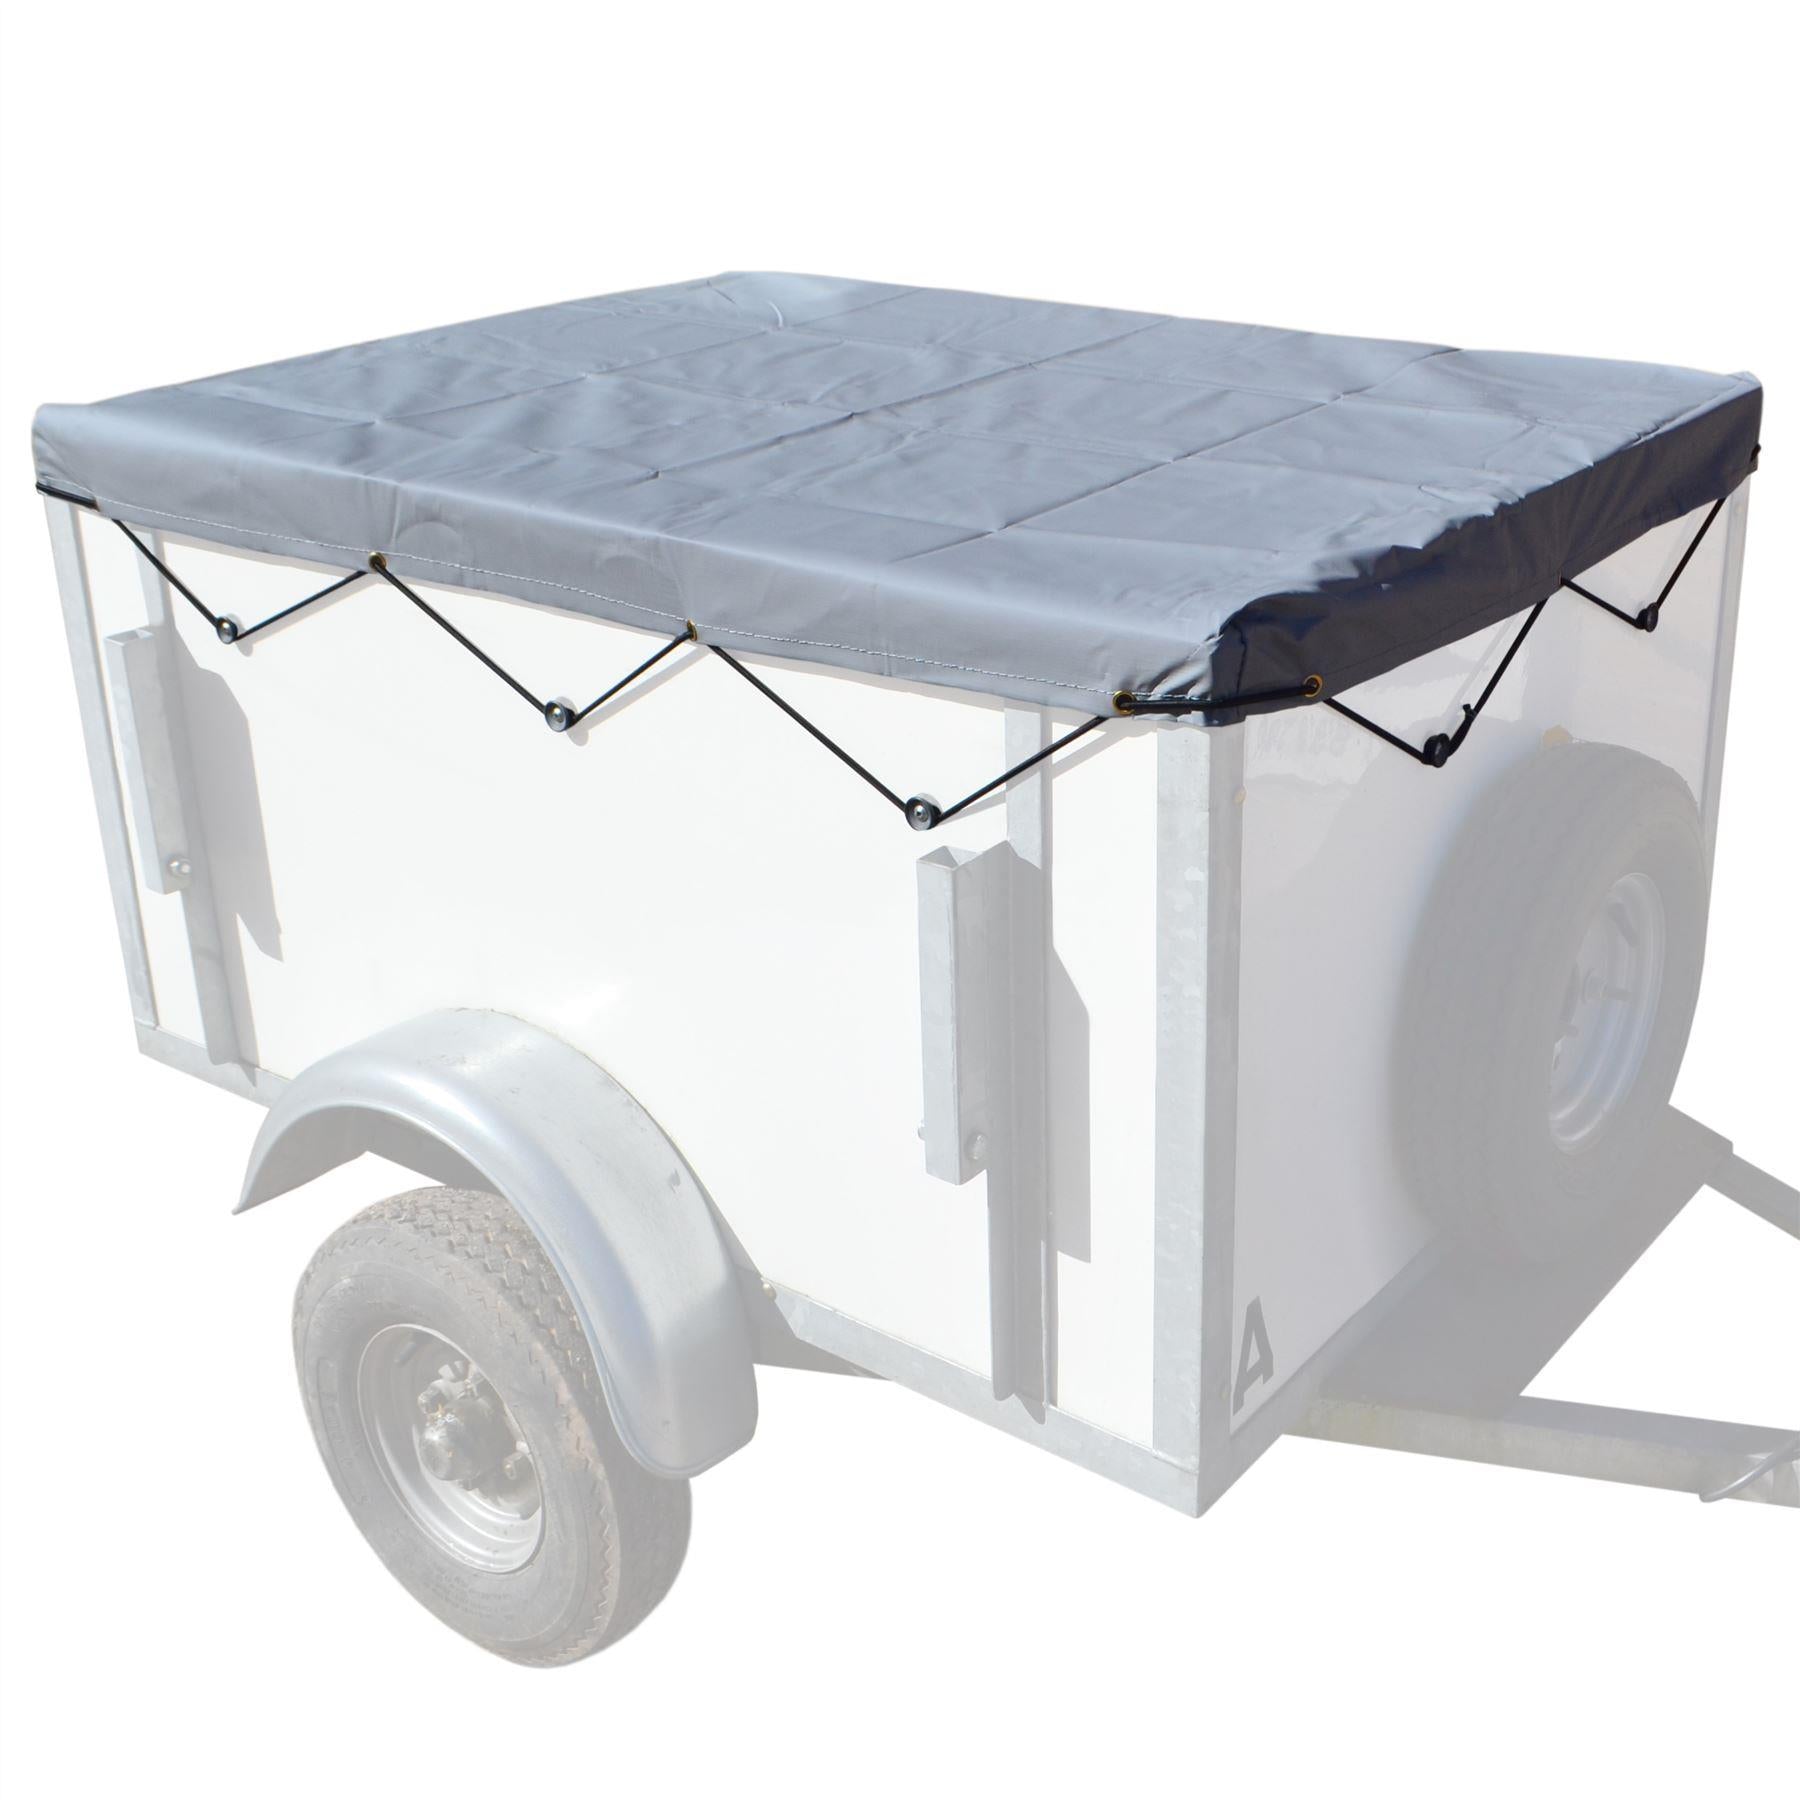 Trailer Cover With Elastic Cord Eyelets Erde Daxara